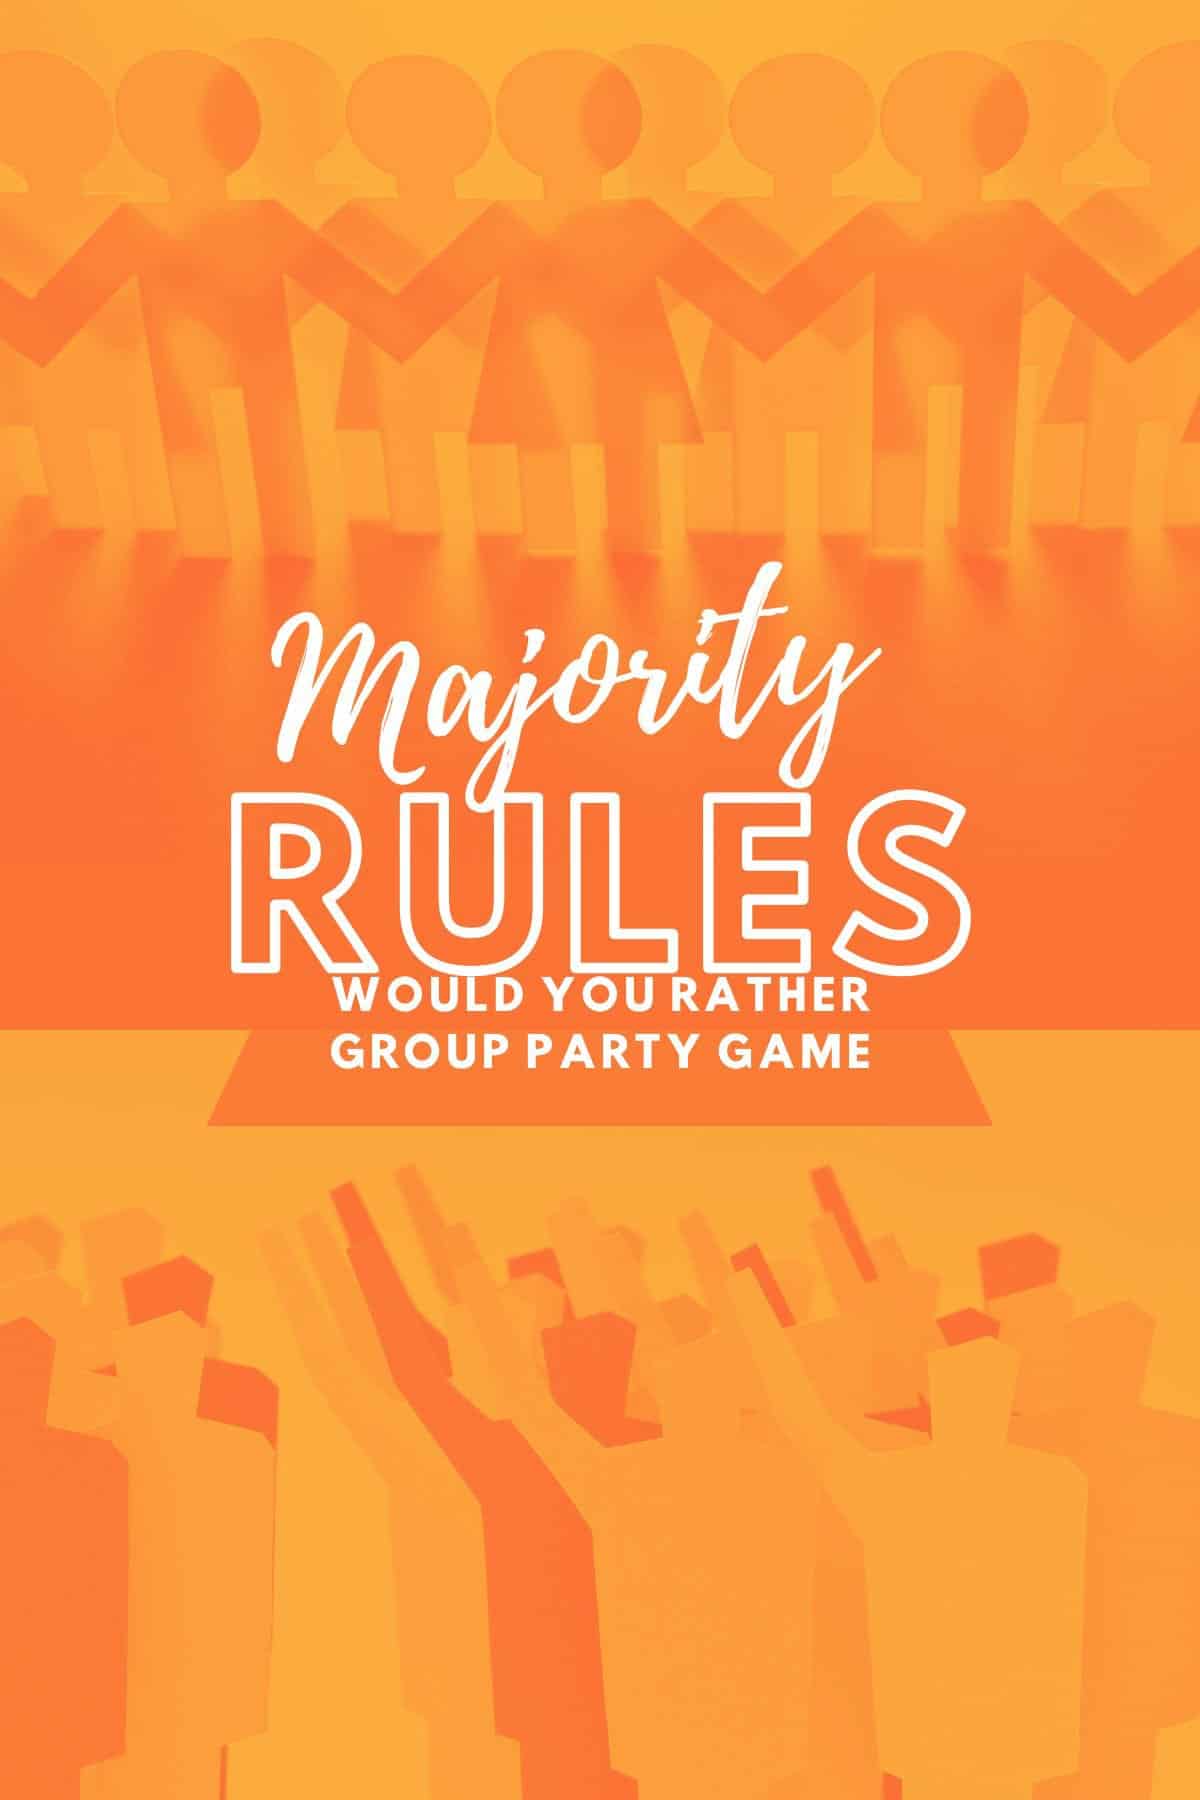 Paper people playing a Would You Rather group party game with the title Majority Rules written on top.